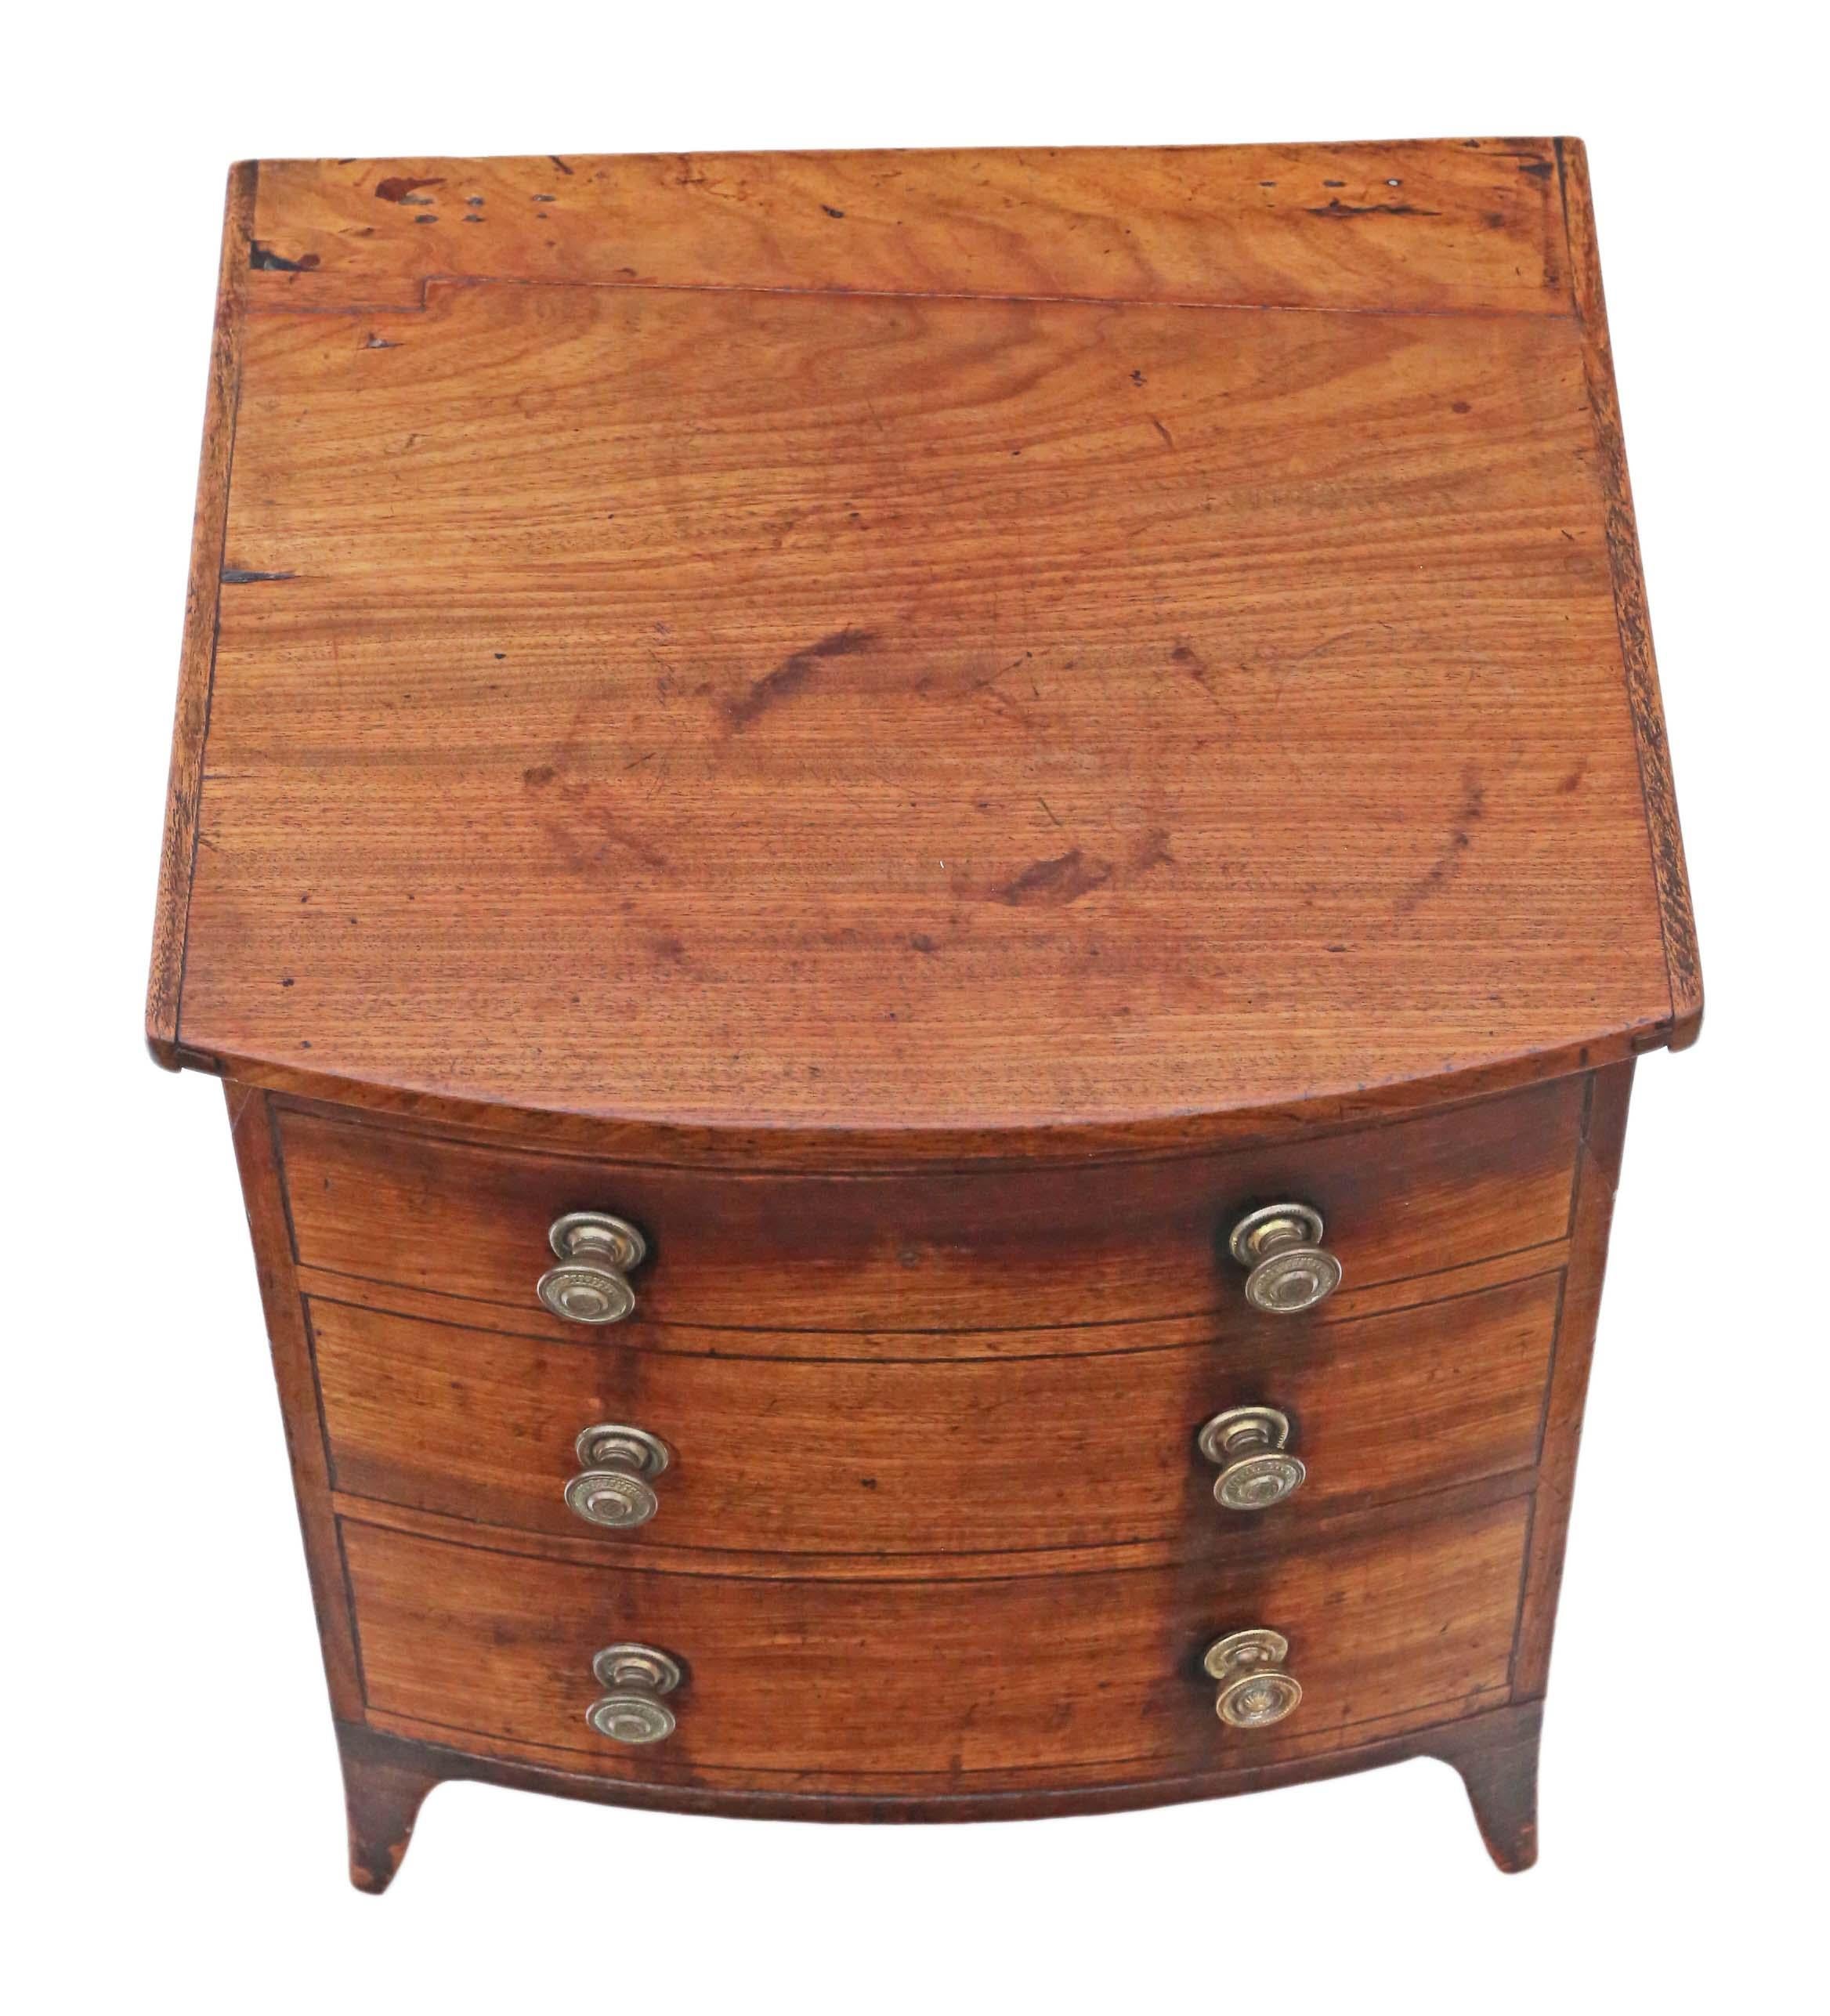 Victorian mahogany coal scuttle box or cabinet, 19th century. In the style and form of a miniature Georgian chest of drawers.
This is a lovely item, that is full of charm and character. Later toleware shovel and match box.
This is a quality piece,